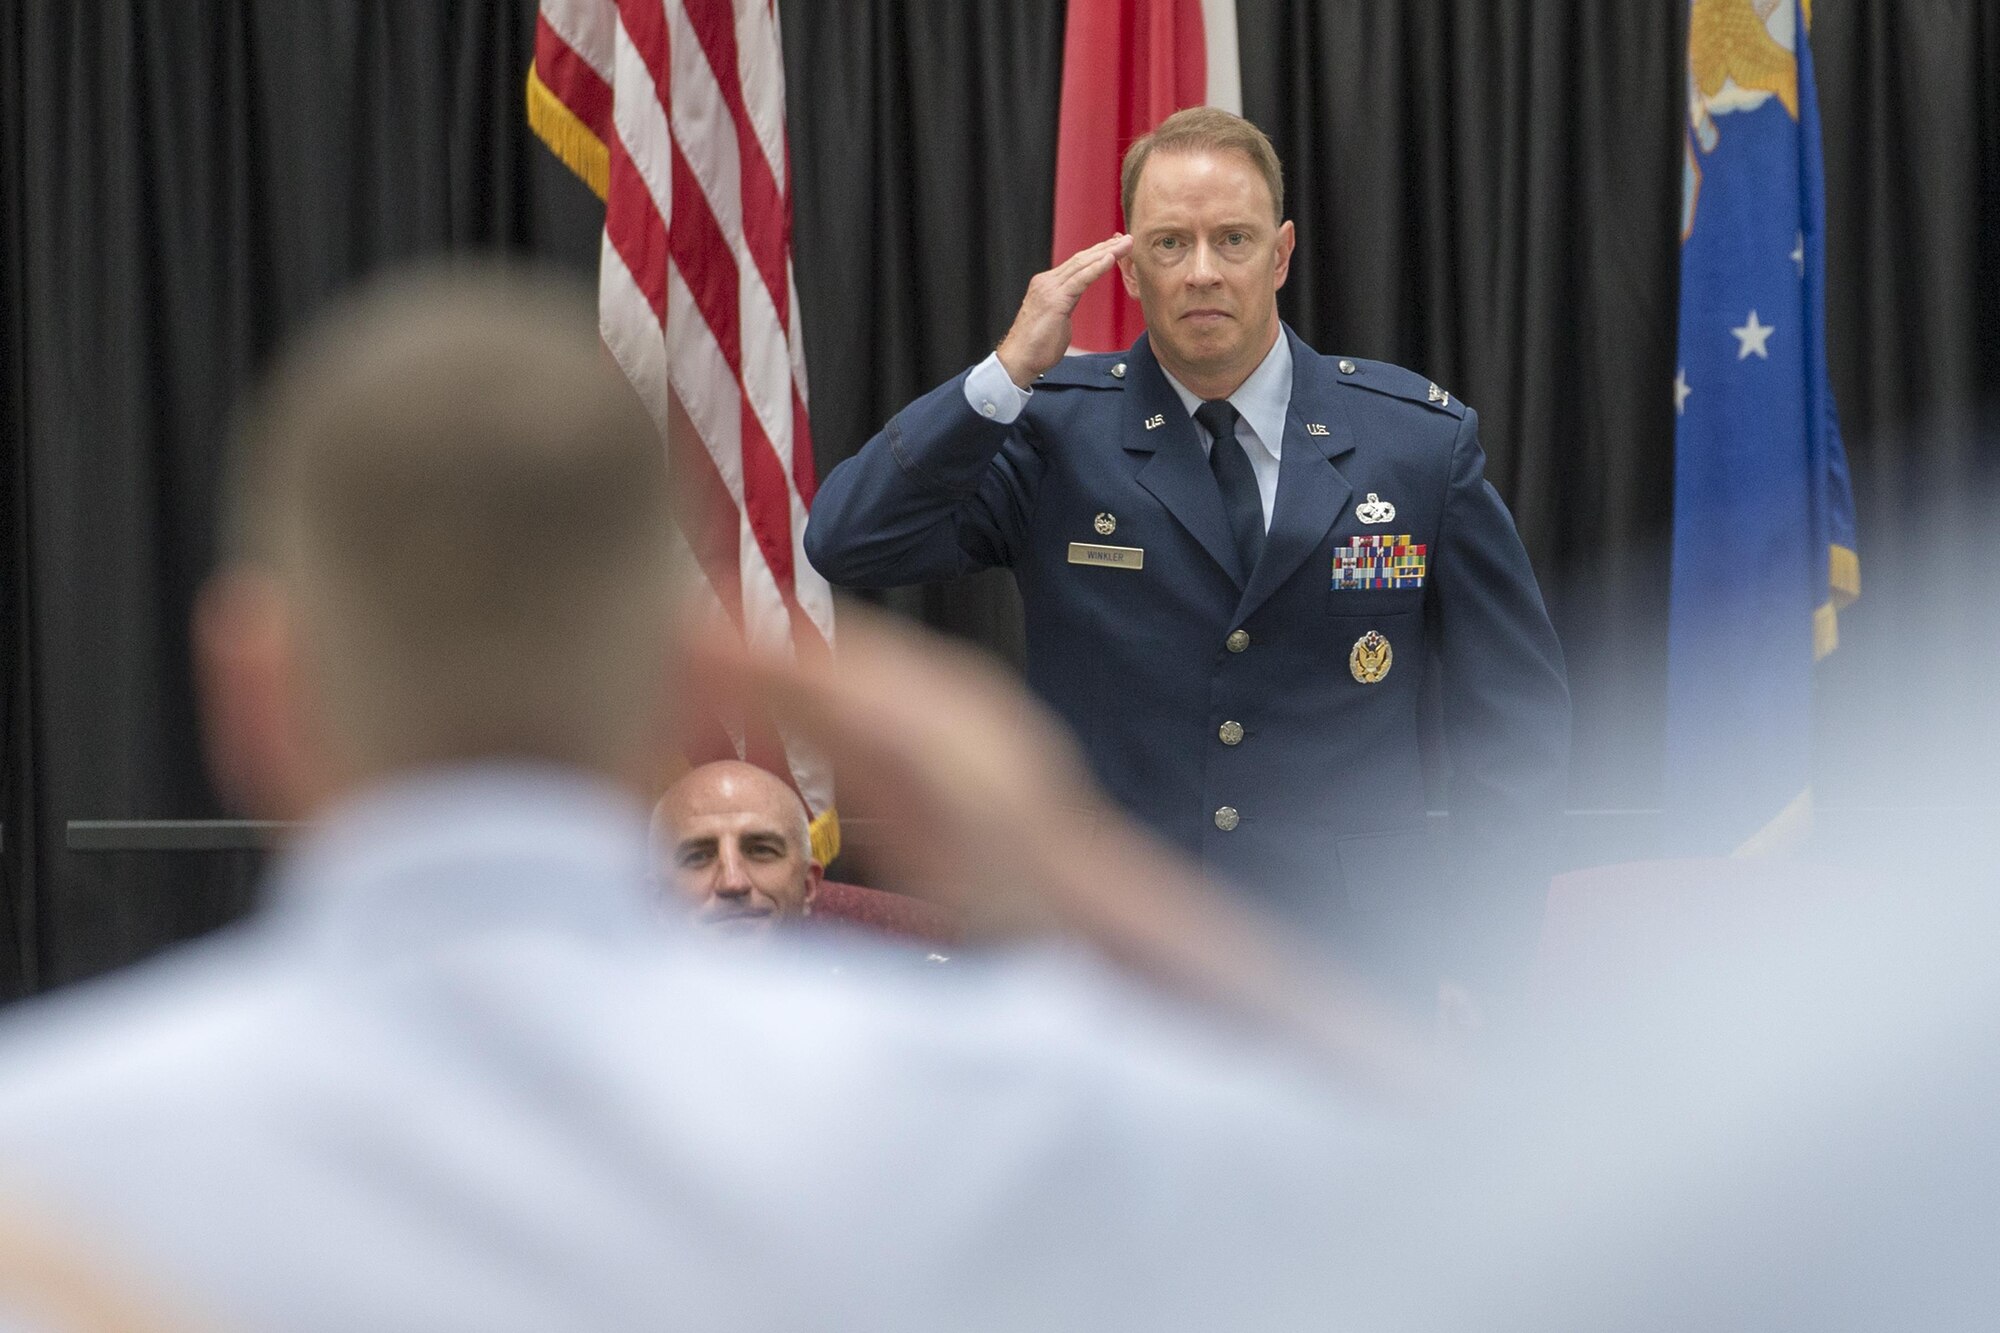 Col. John Winkler, 374th Mission Support Group commander, renders his first salute as commander during a change of command ceremony at Yokota Air Base, Japan, Aug. 8, 2016. (U.S. Air Force photo by Yasuo Osakabe/Released)